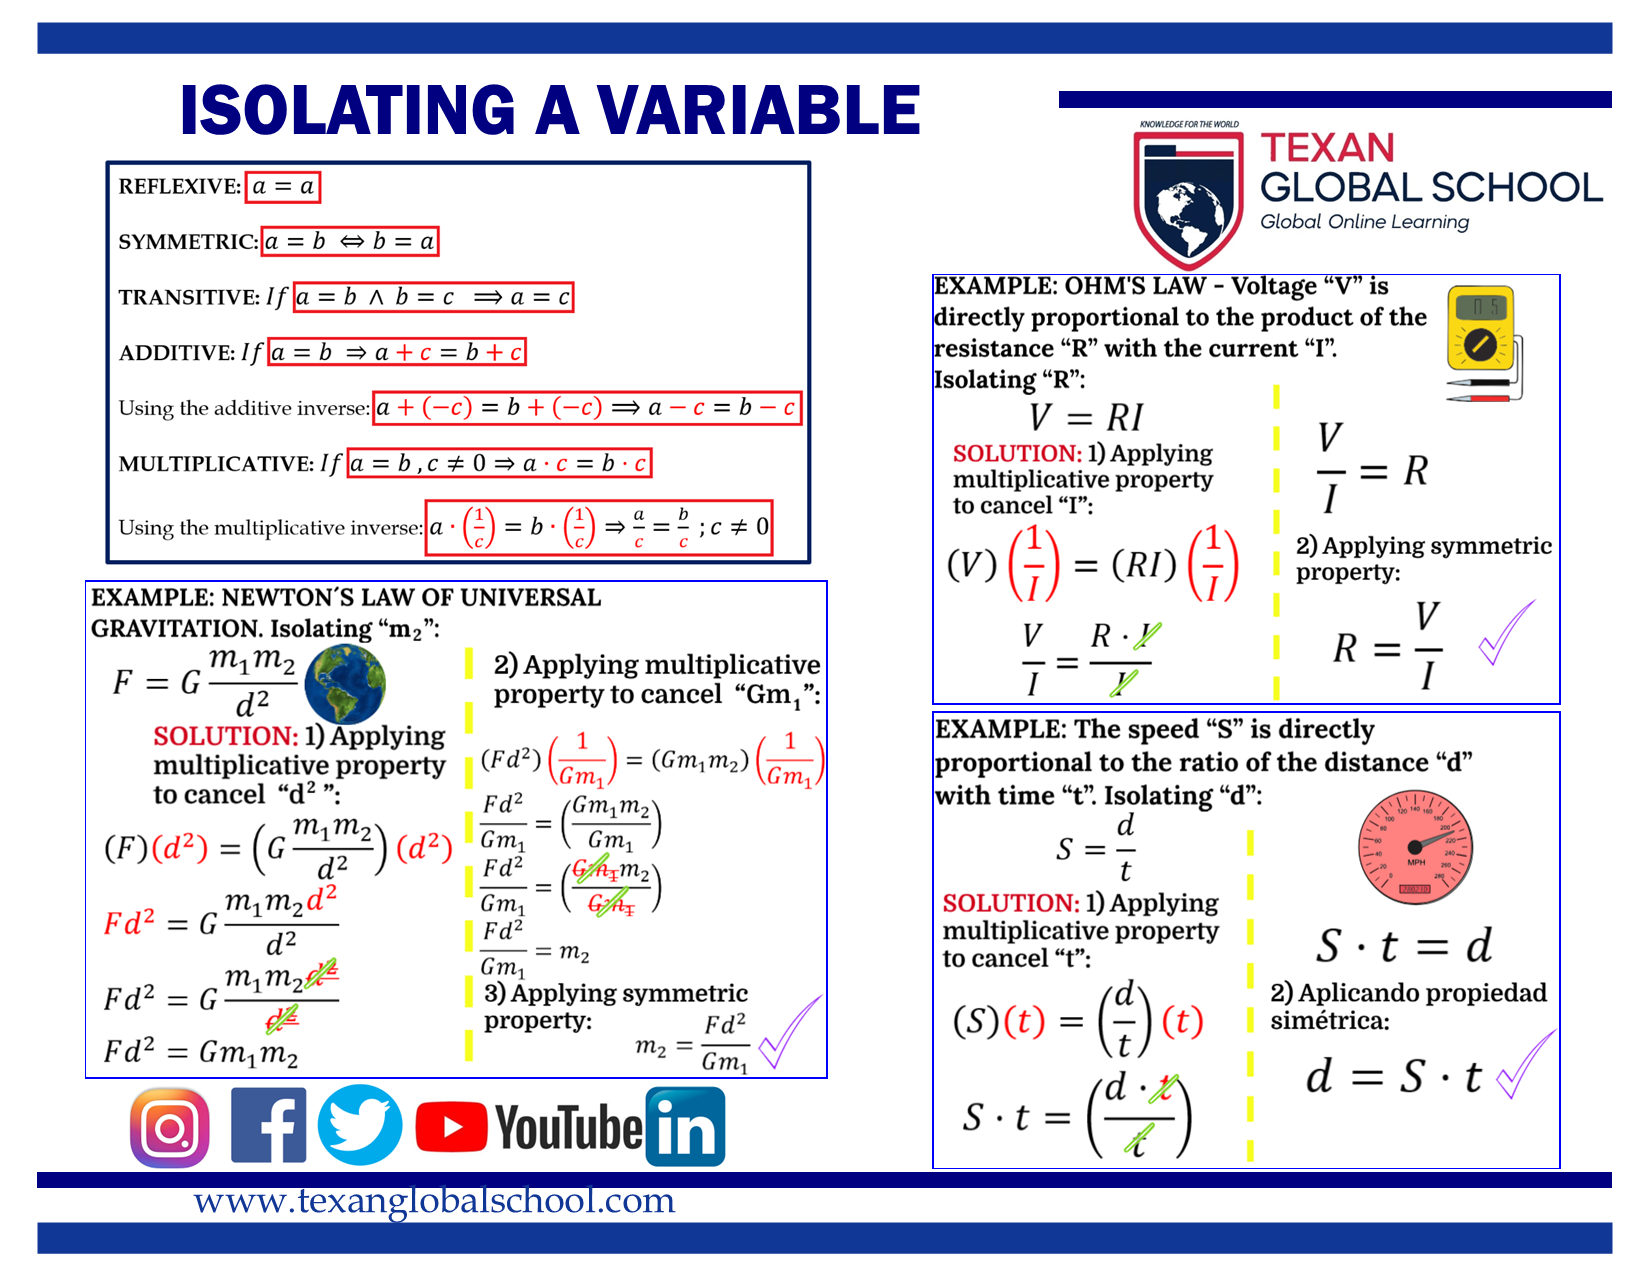 Isolating a Variable